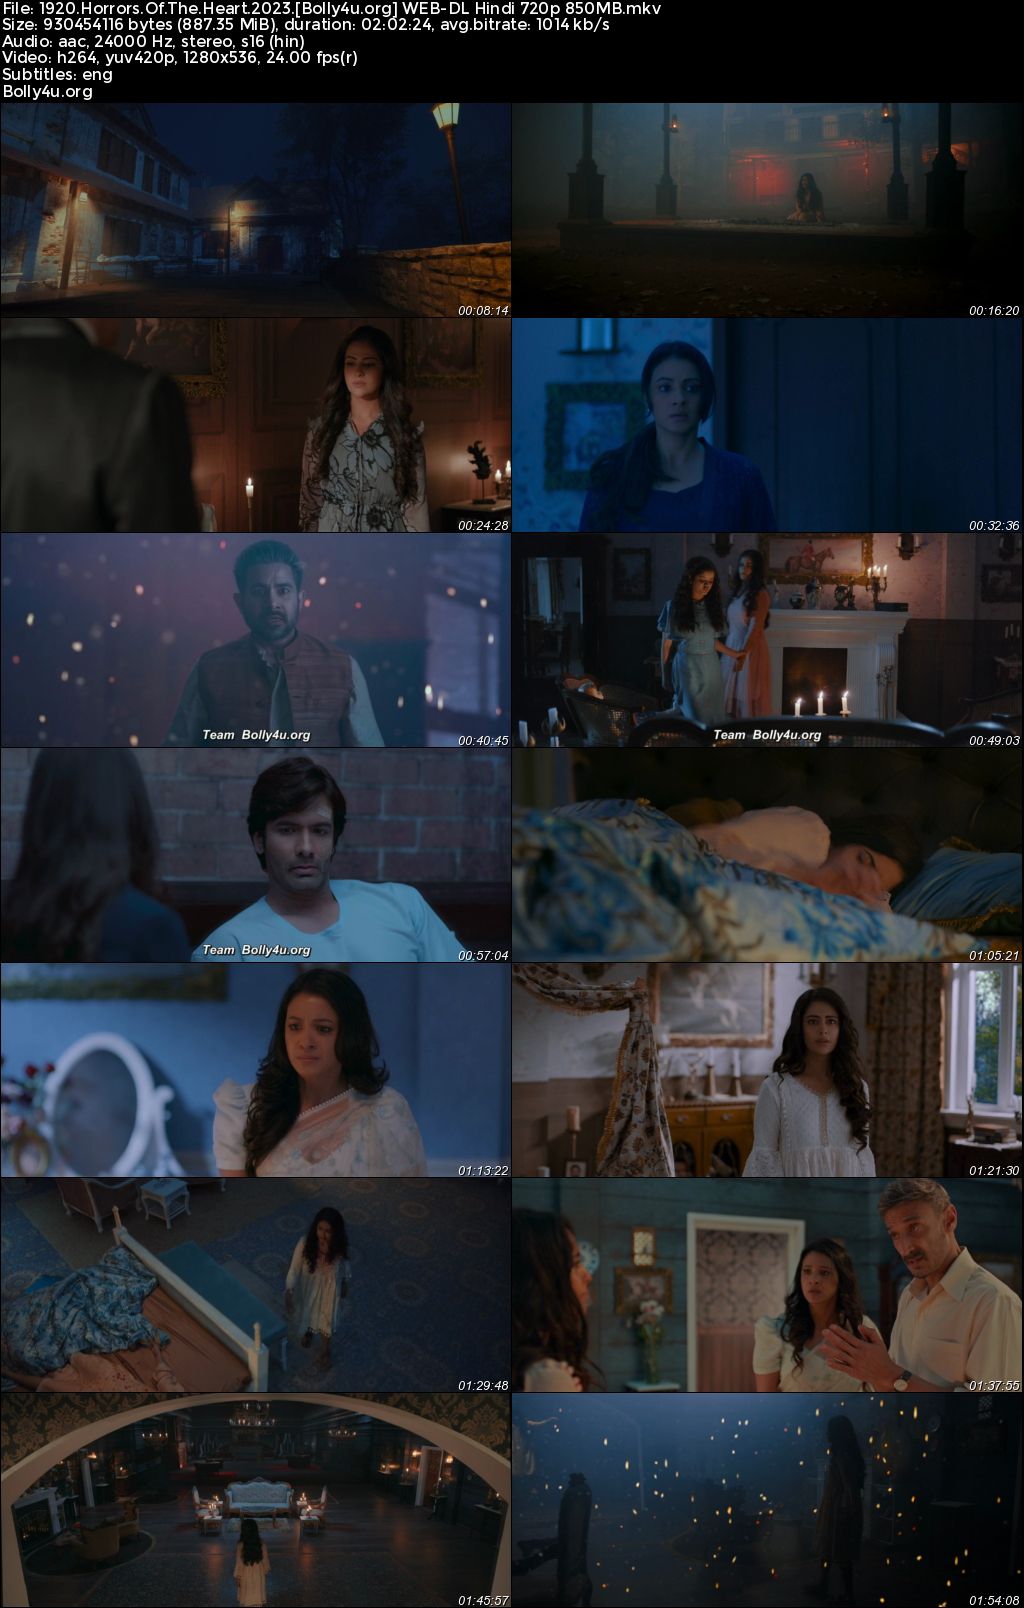 1920 Horrors of The Heart 2023 WEB-DL Hindi Full Movie Download 1080p 720p 480p